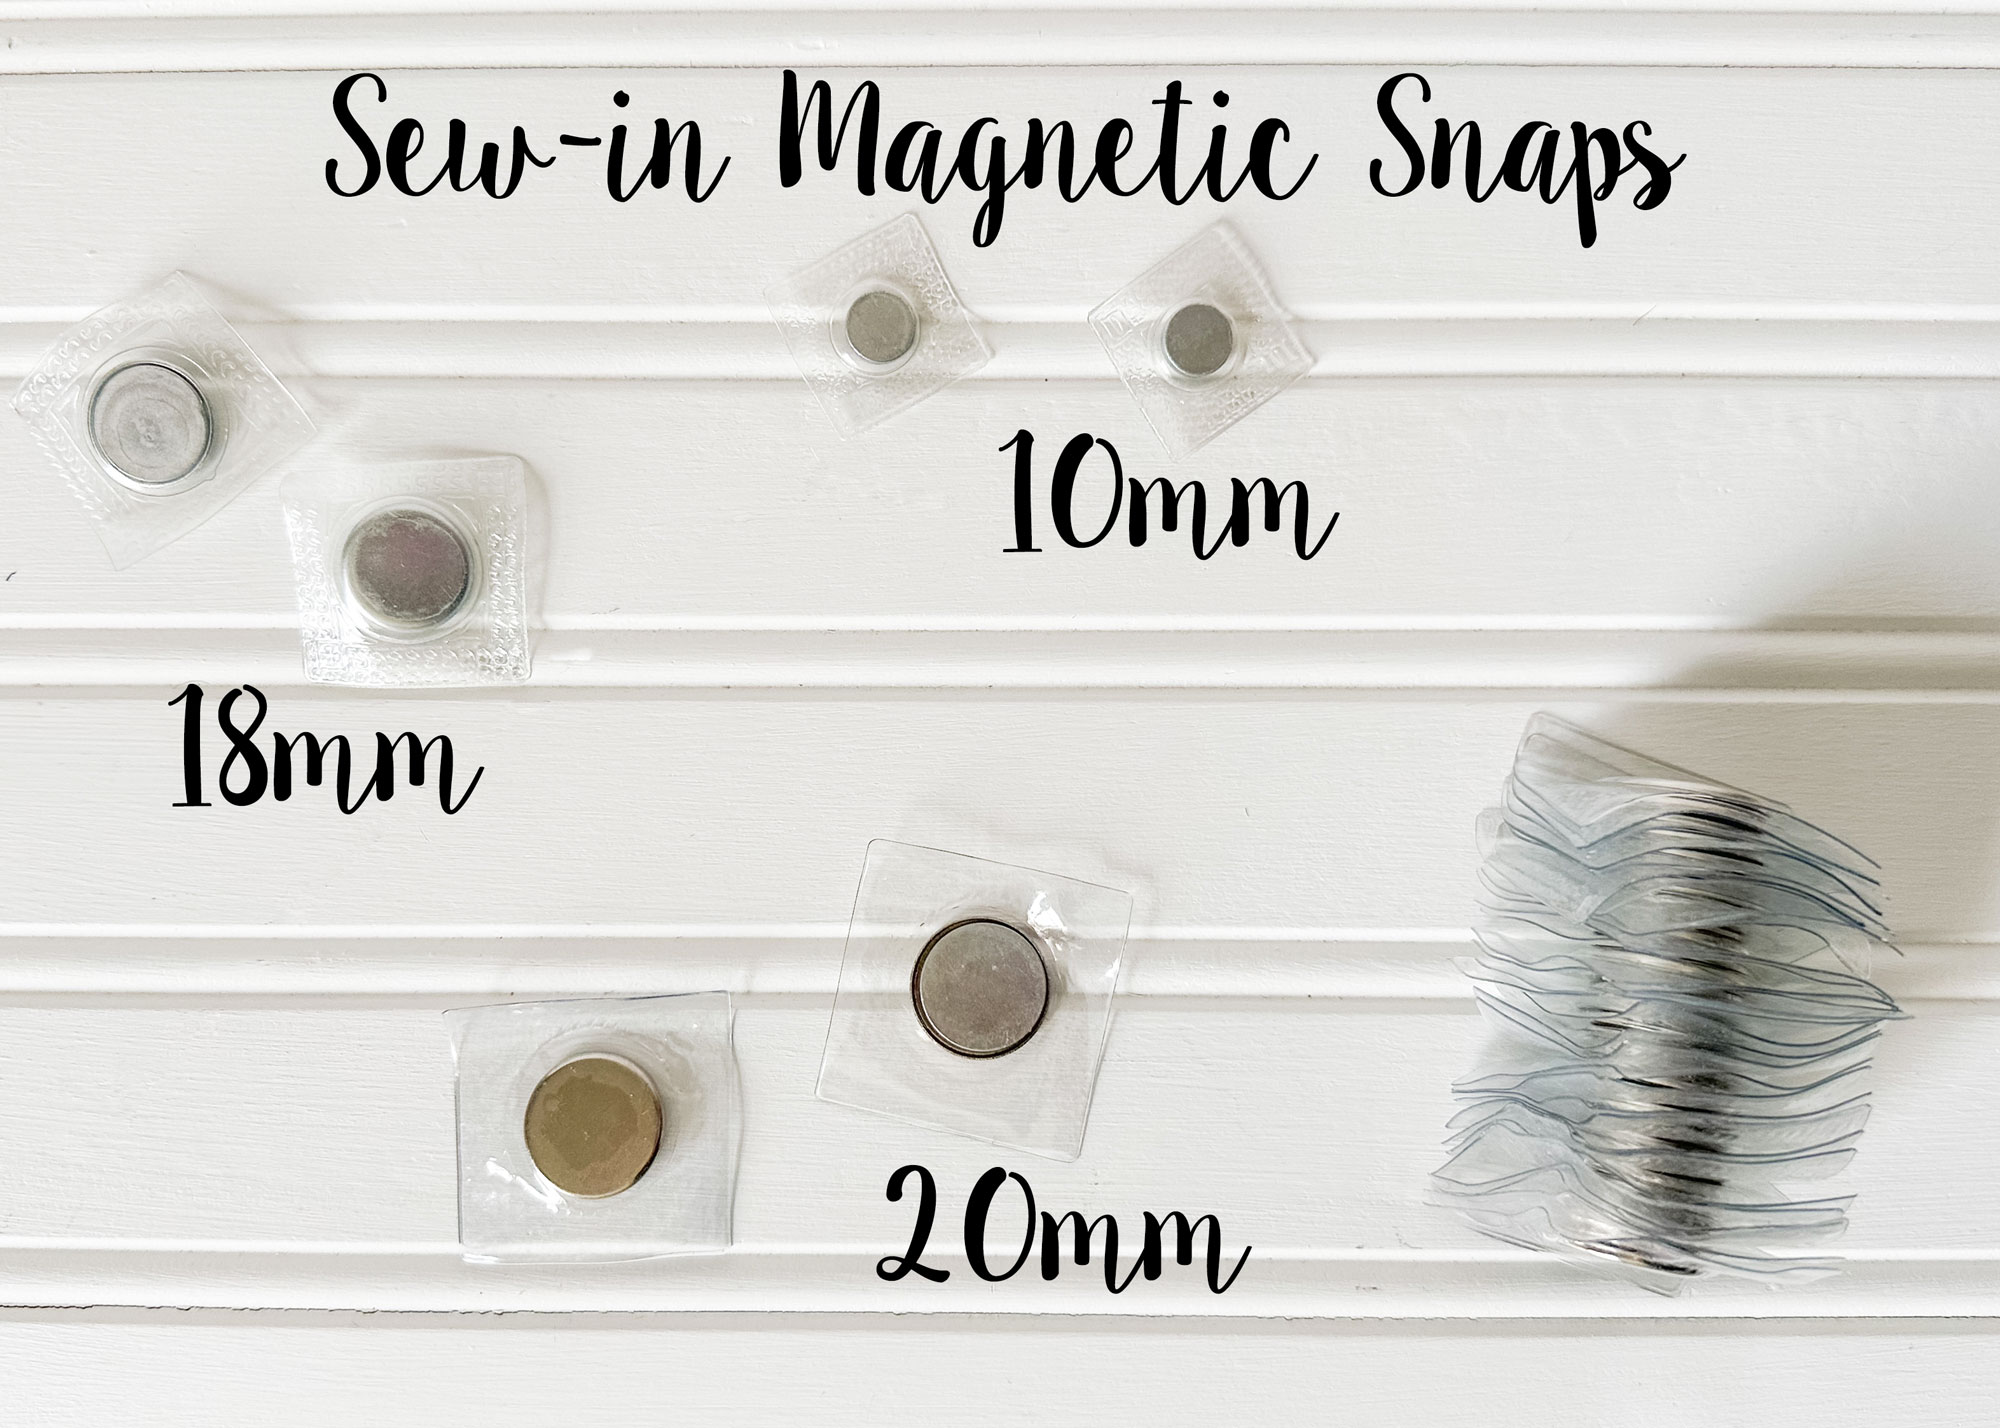 How to Use Dritz Magnetic Snaps